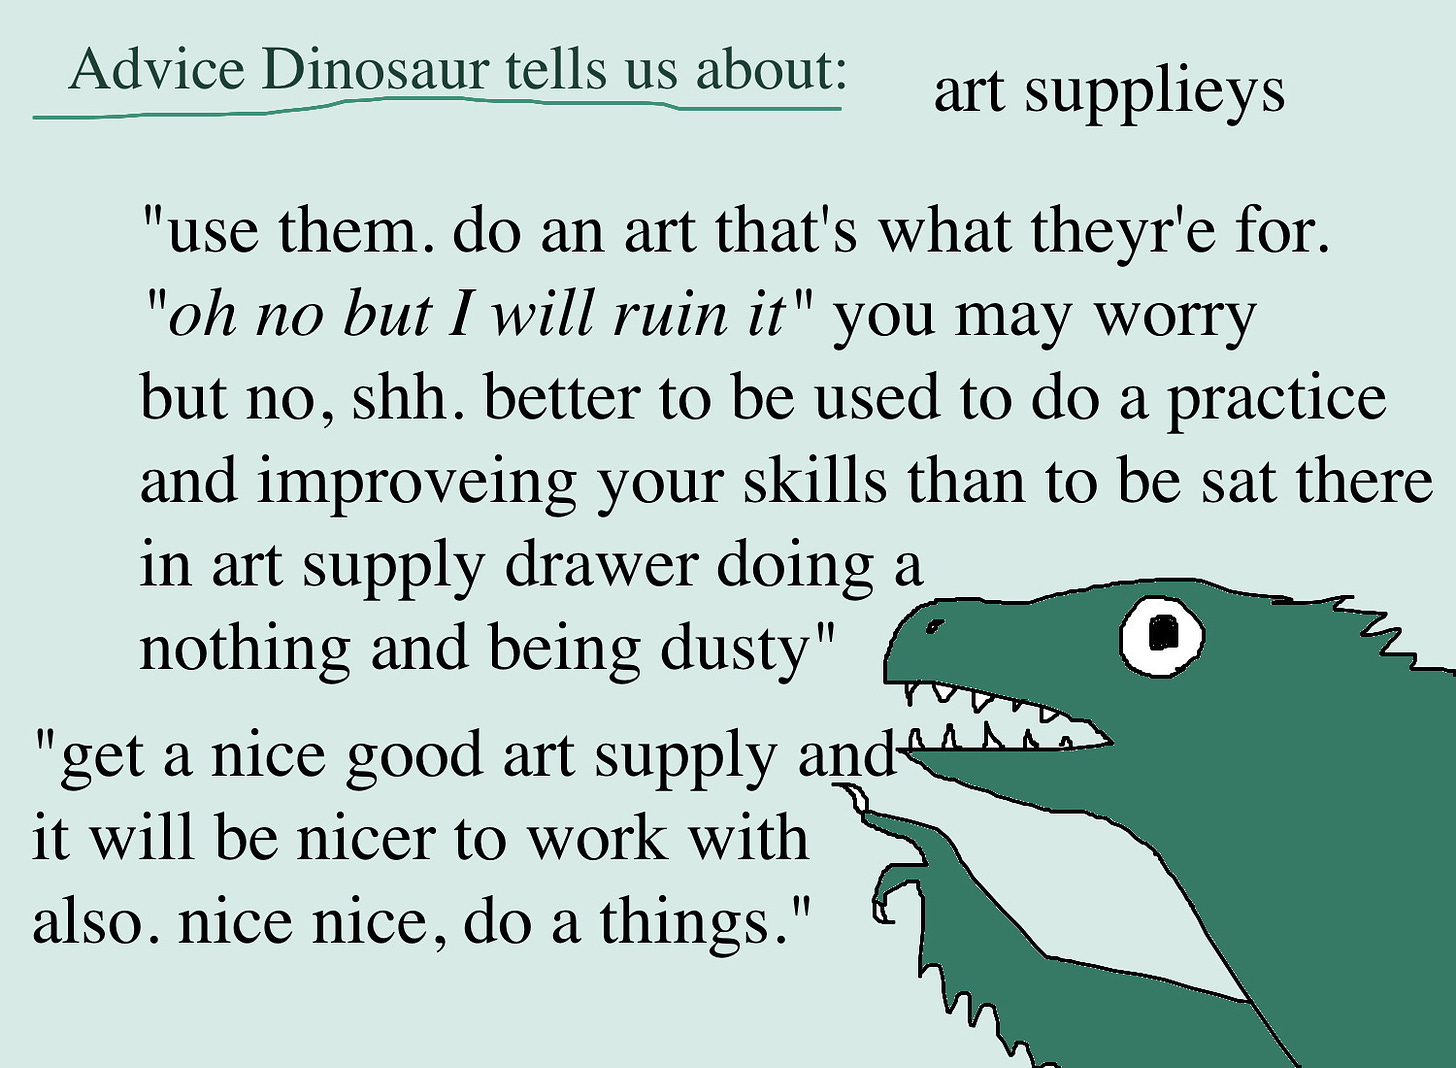 Advice Dinosaur tells us about art supplies graphic "use them. do an art. that's what they;re for..."